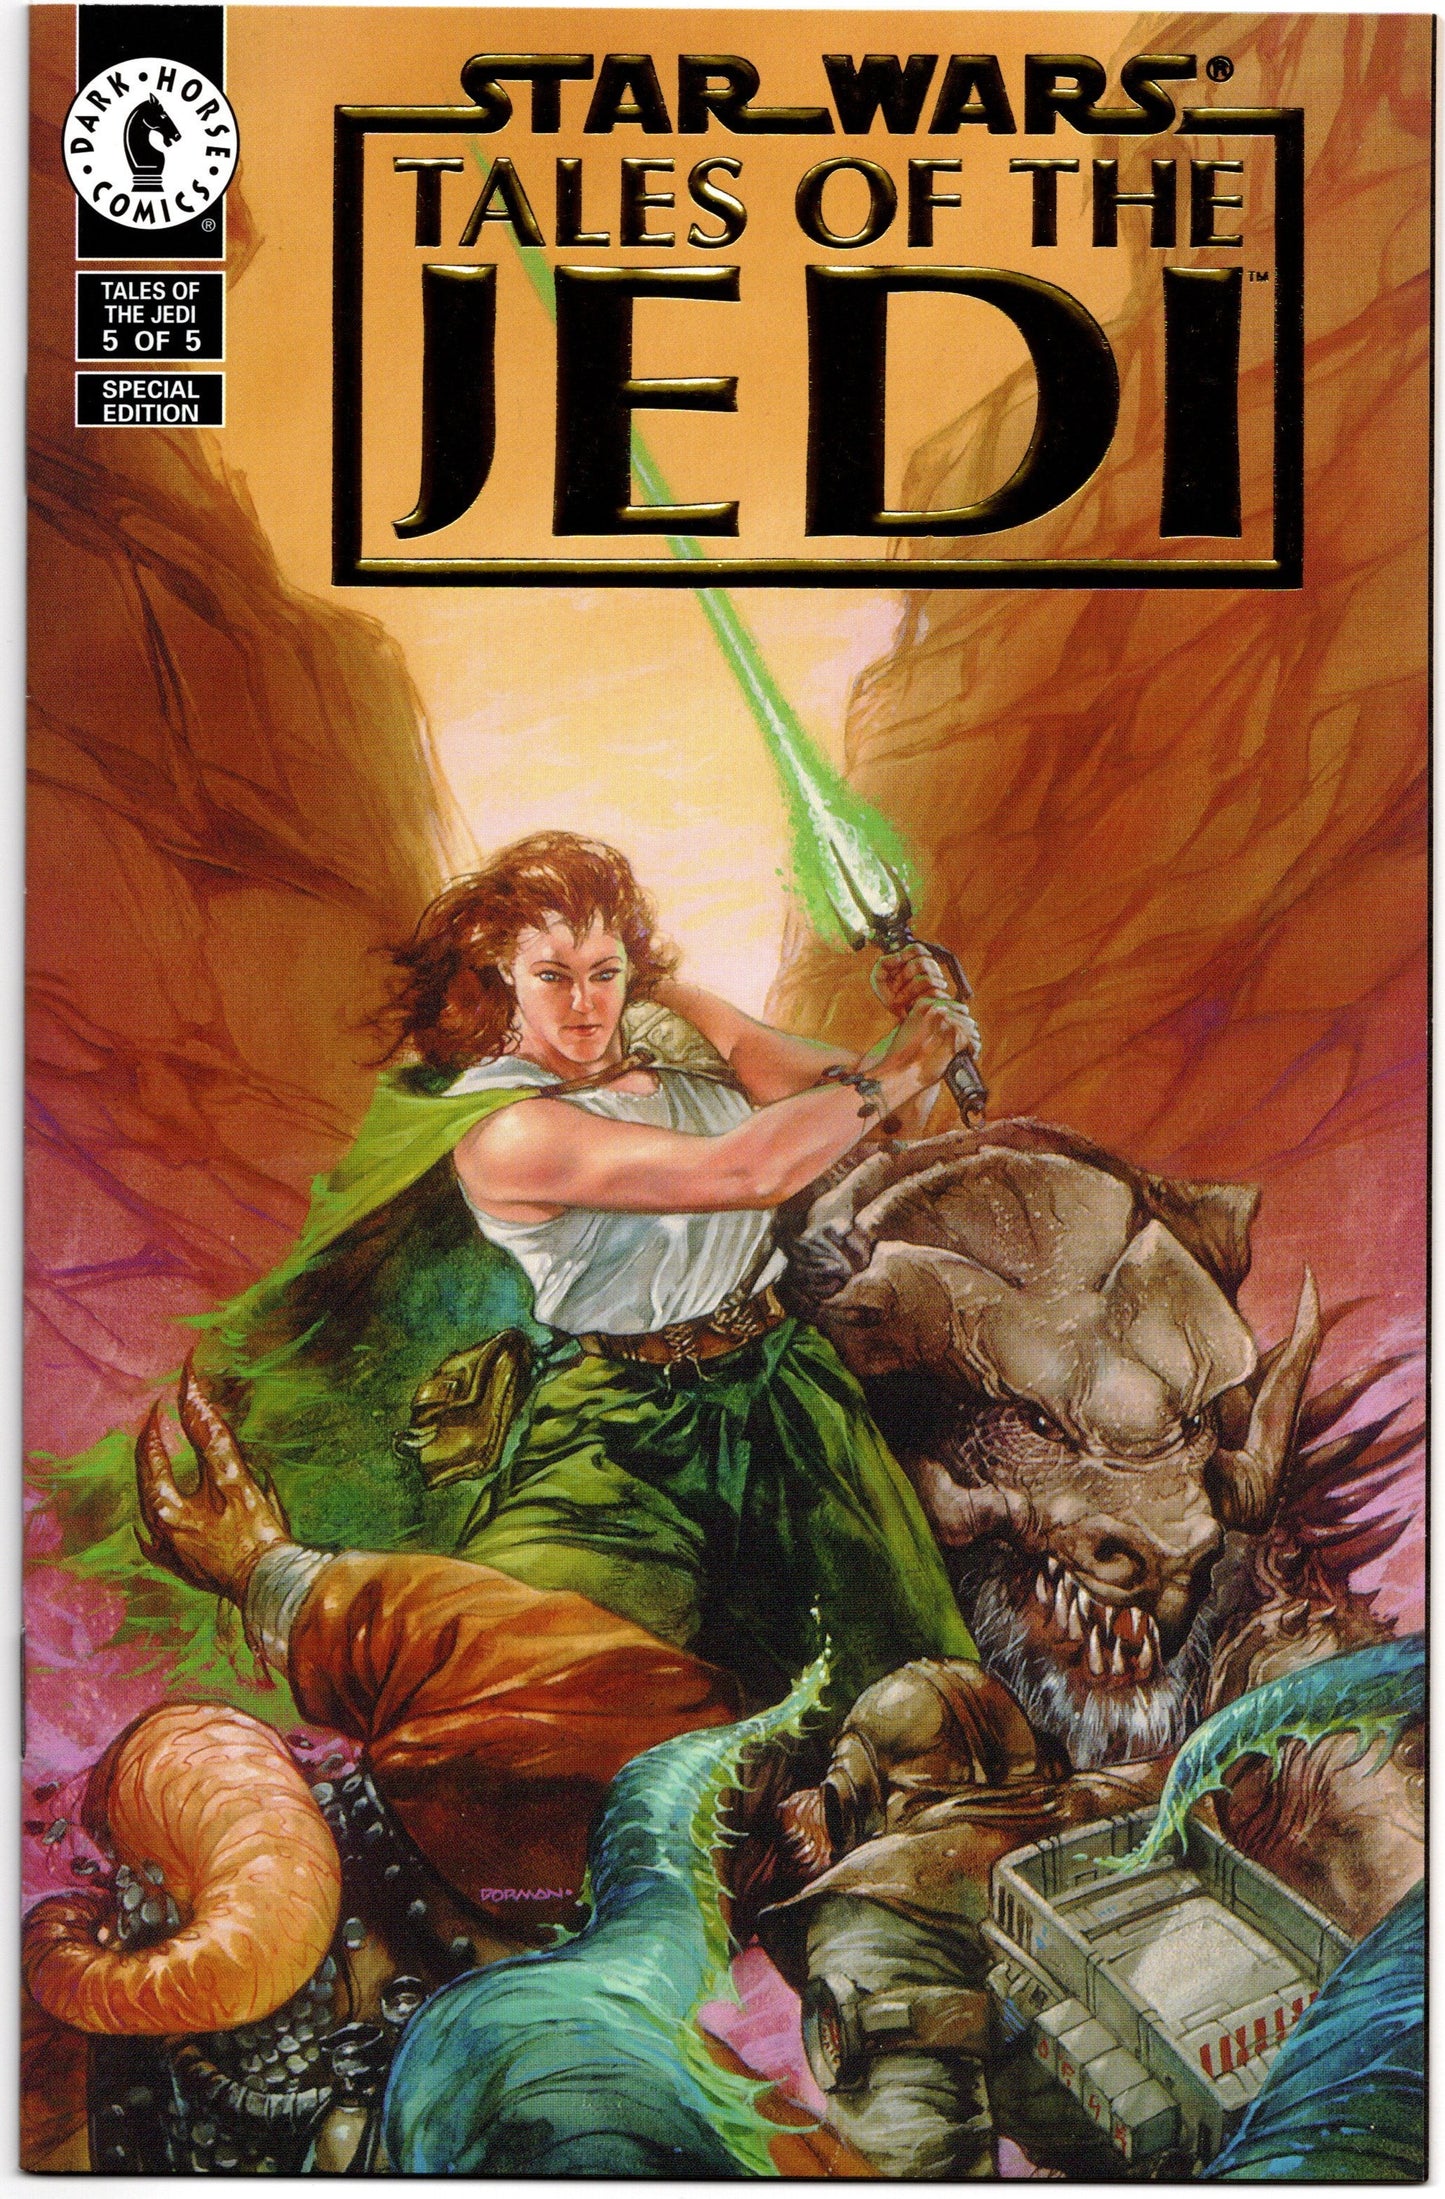 Star Wars Tales of the Jedi #5 - Gold Foil Edition